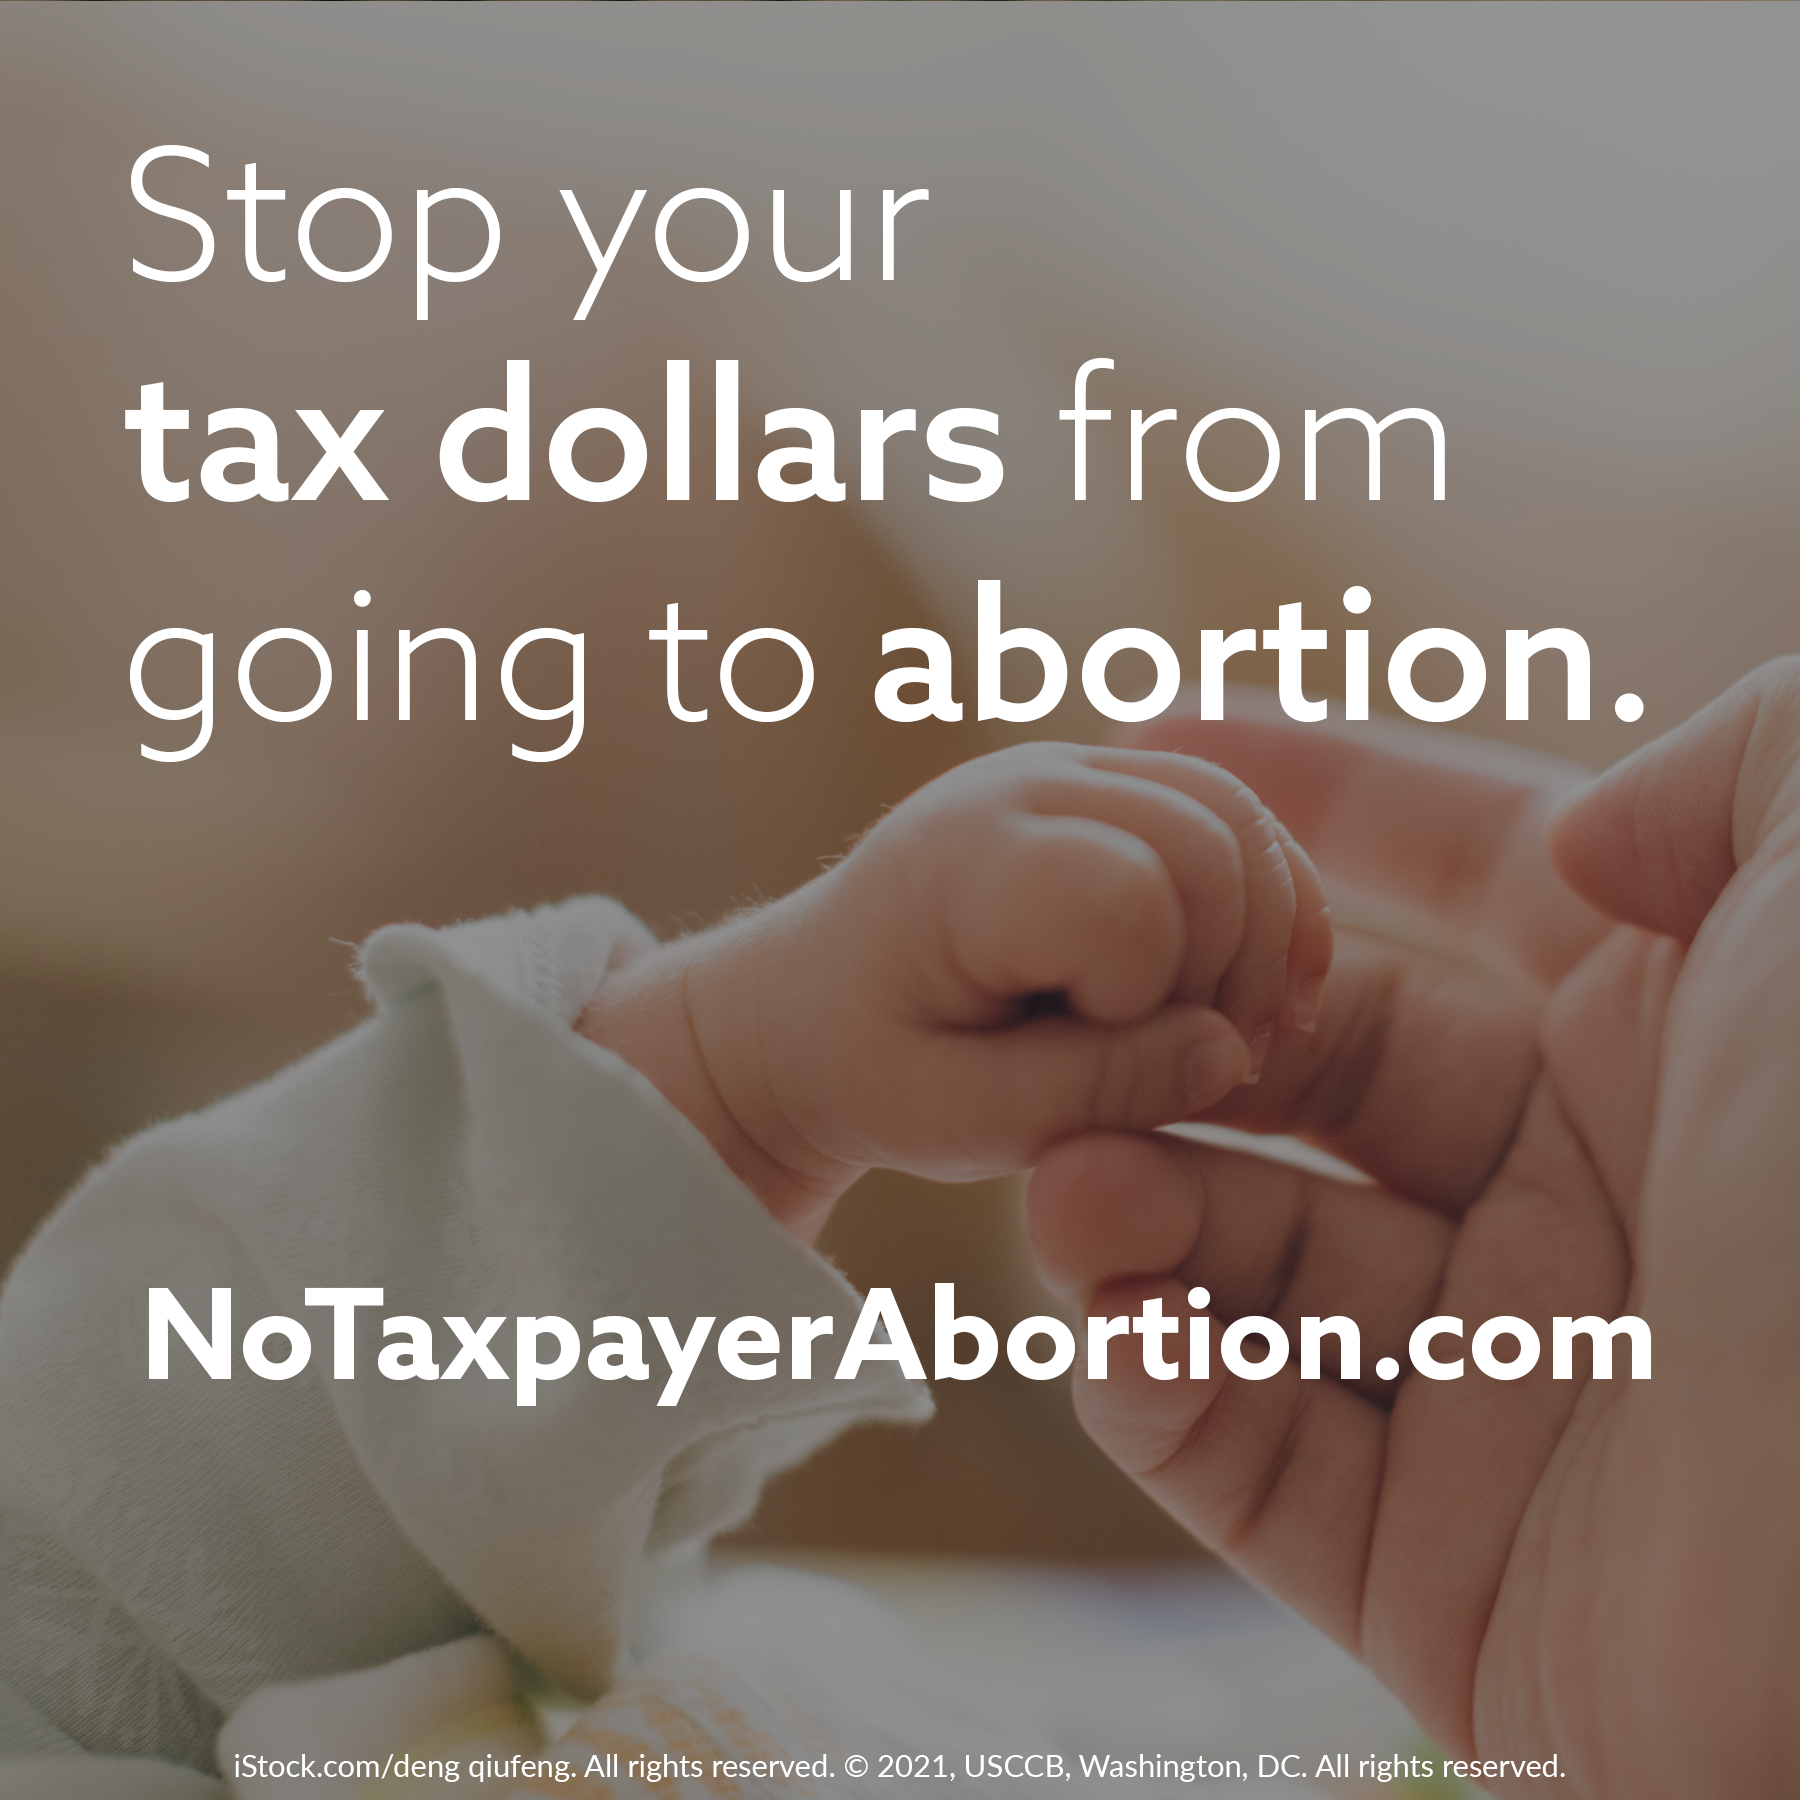 https://www.usccb.org/sites/default/files/2021-03/no-taxpayer-abortion-7.png